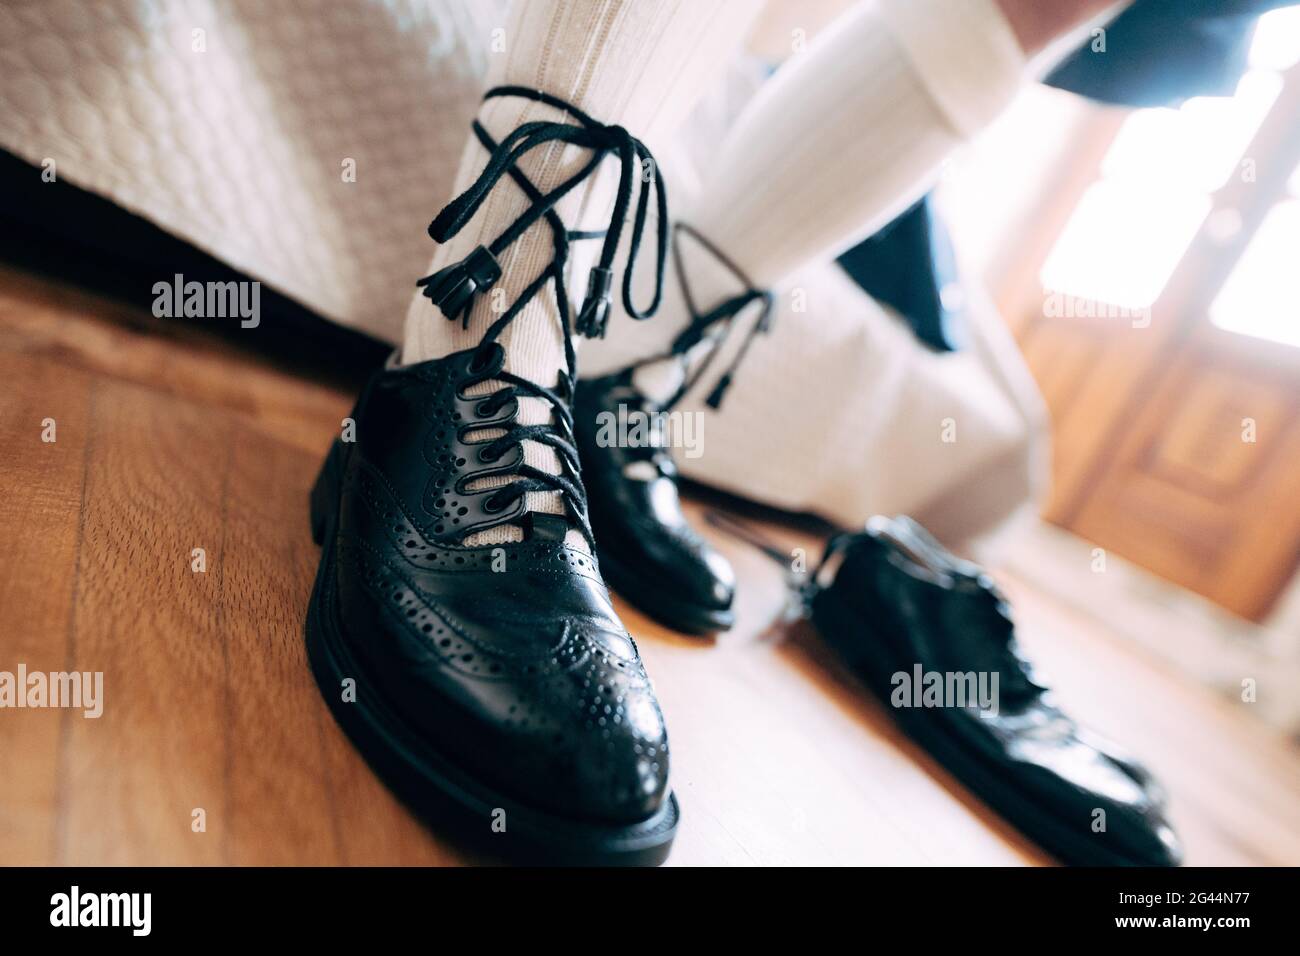 Preparing for a Scottish wedding. Man in a kilt, high socks and shoes laced with long laces. Nearby a pair of black shoes Stock Photo